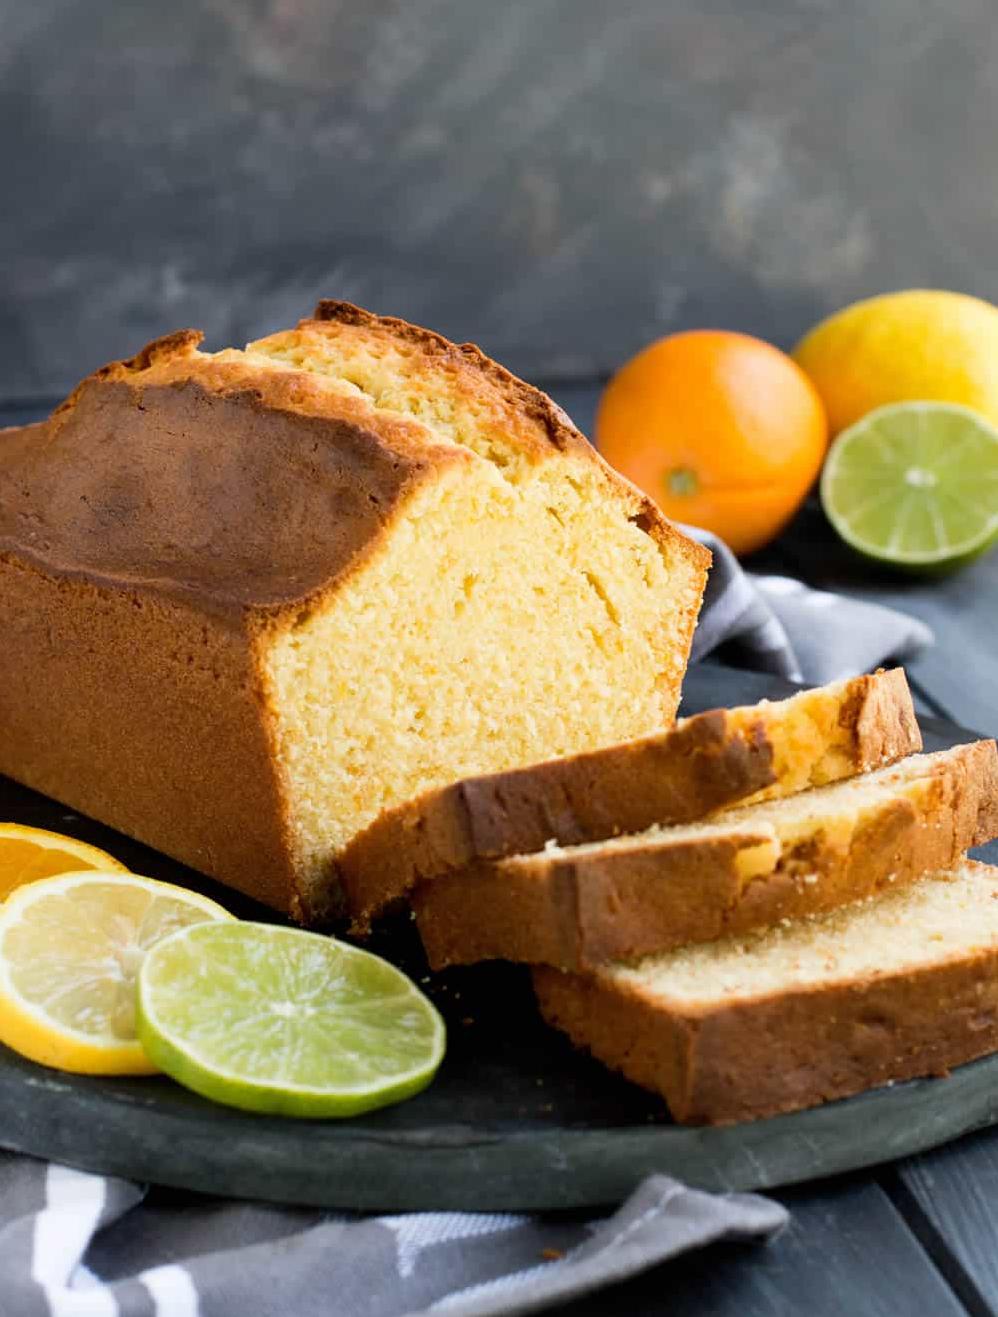  This pound cake is simple but oh so satisfying.